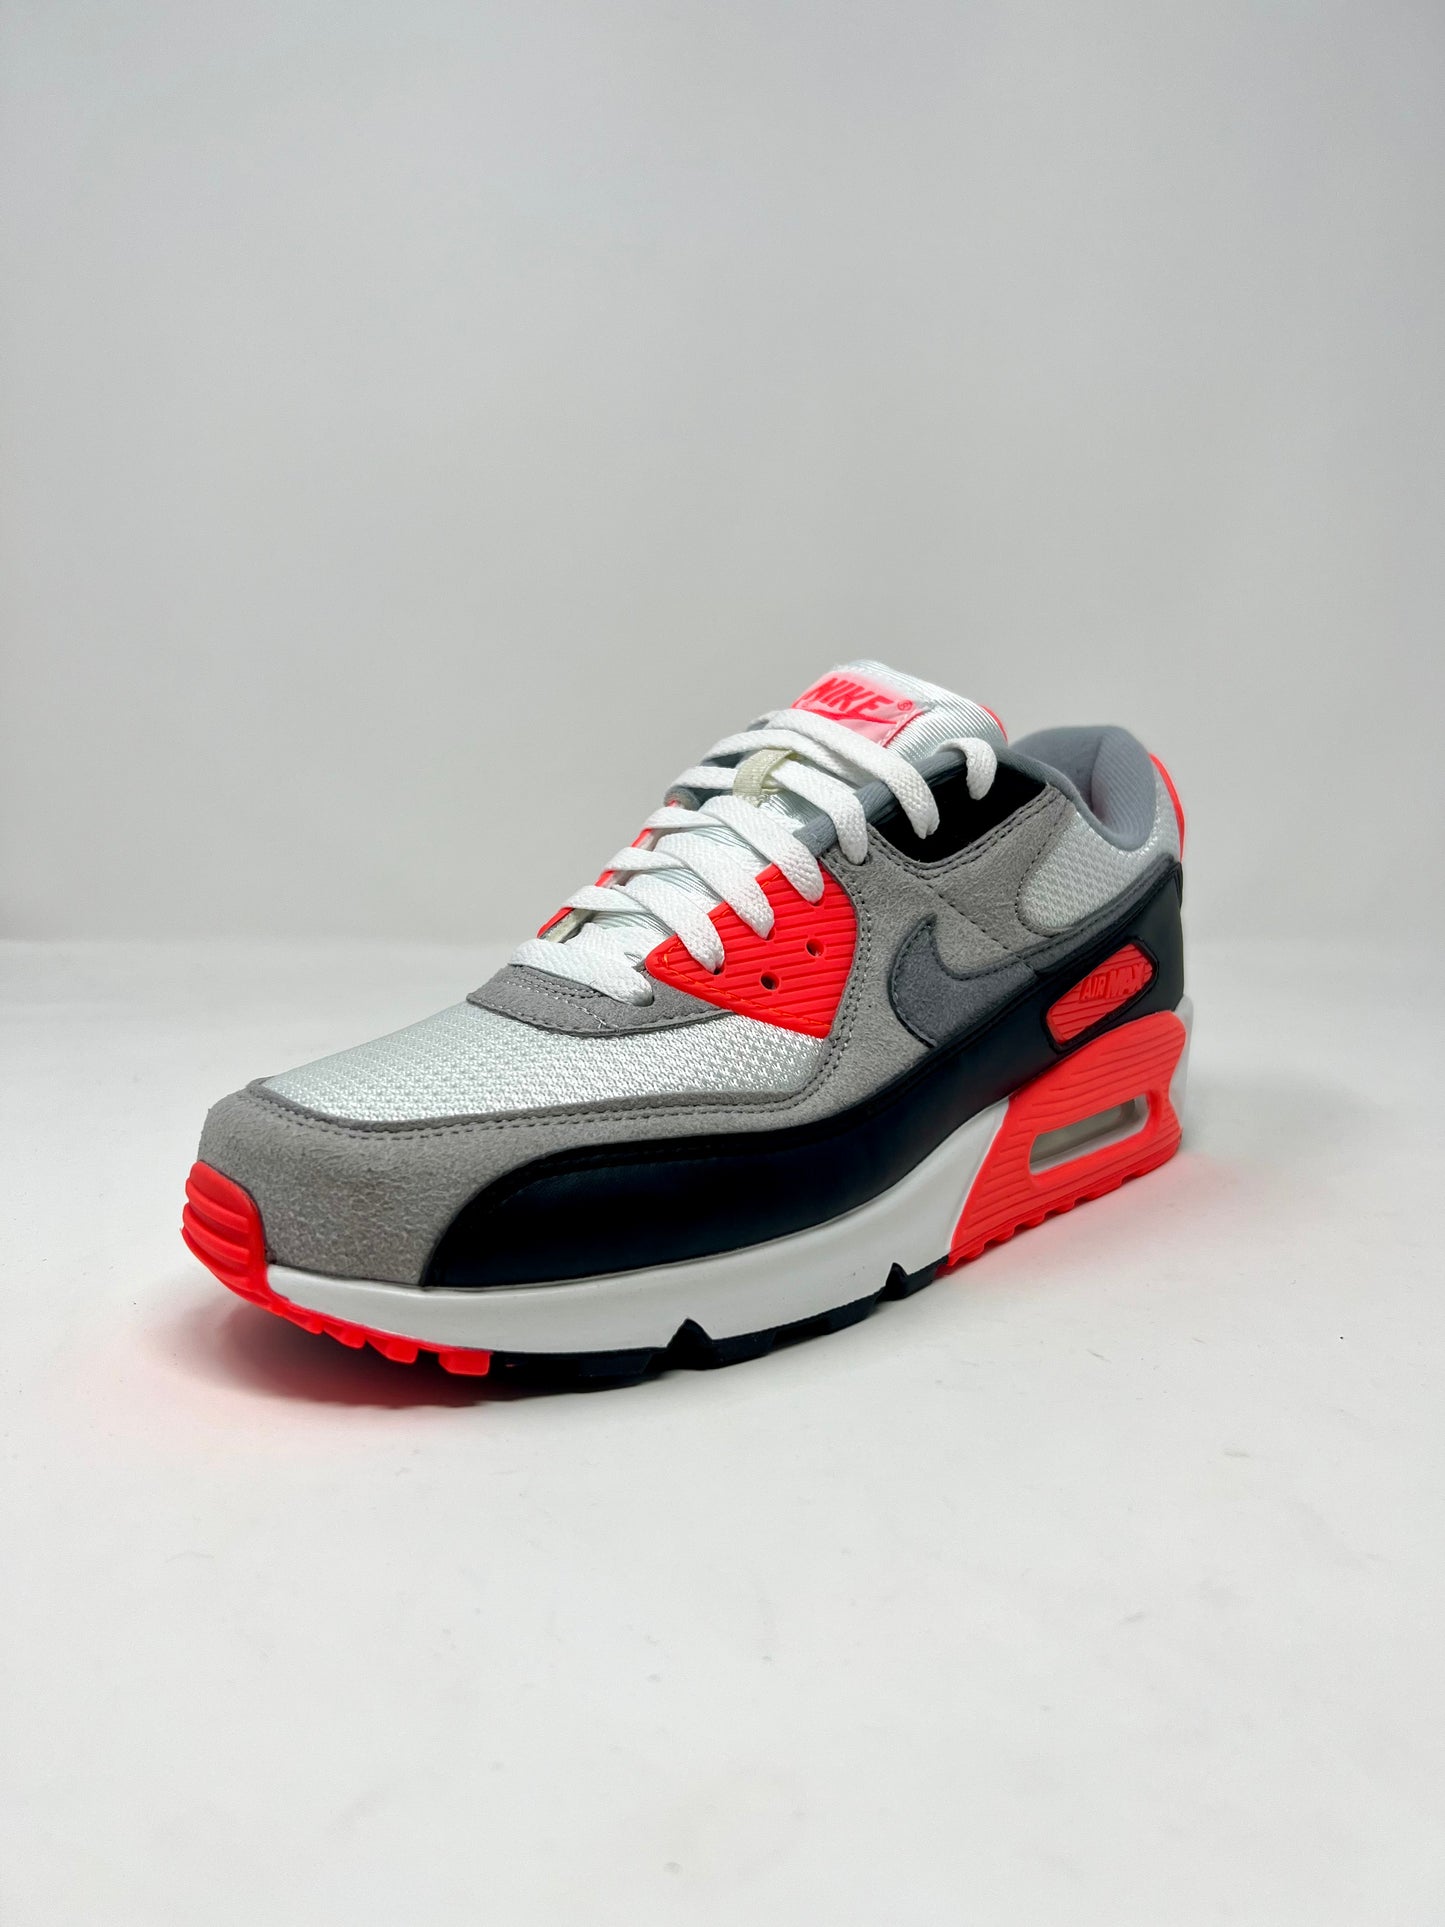 Nike Air Max 90 Infrared 2020 UK7.5 DS